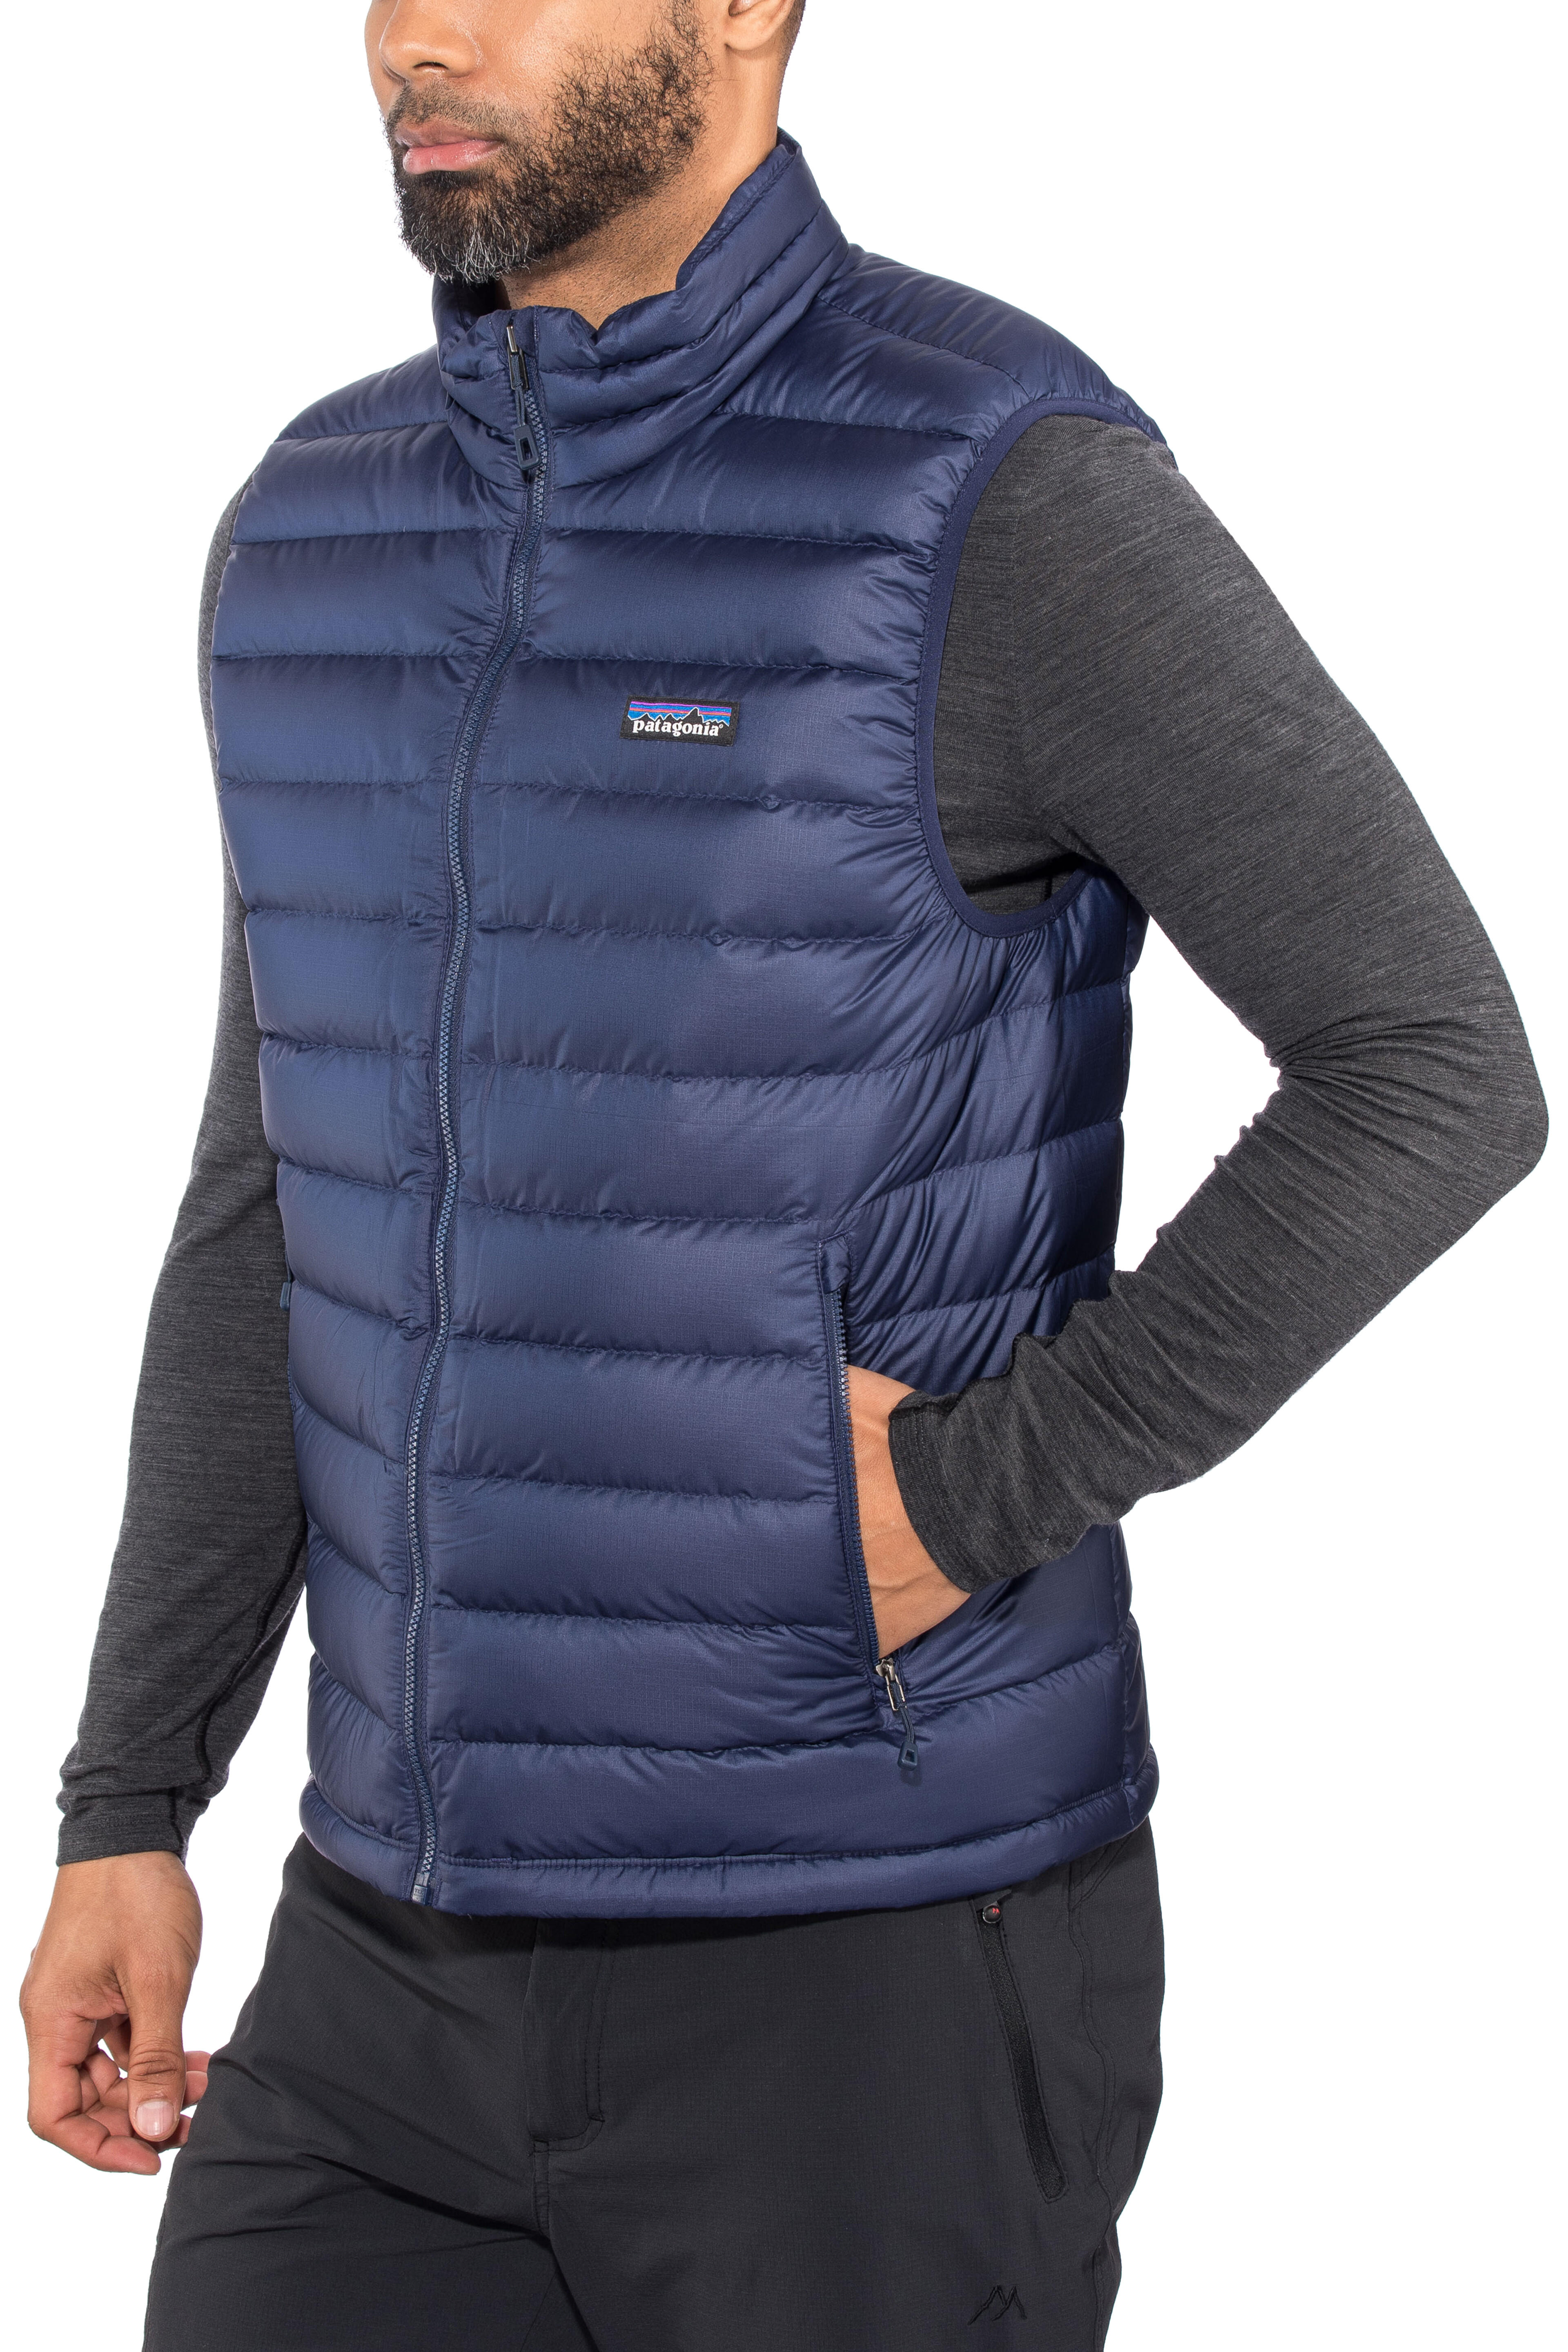 Patagonia Down Sweater Vest Men classic navy w/classic navy | Addnature.co.uk